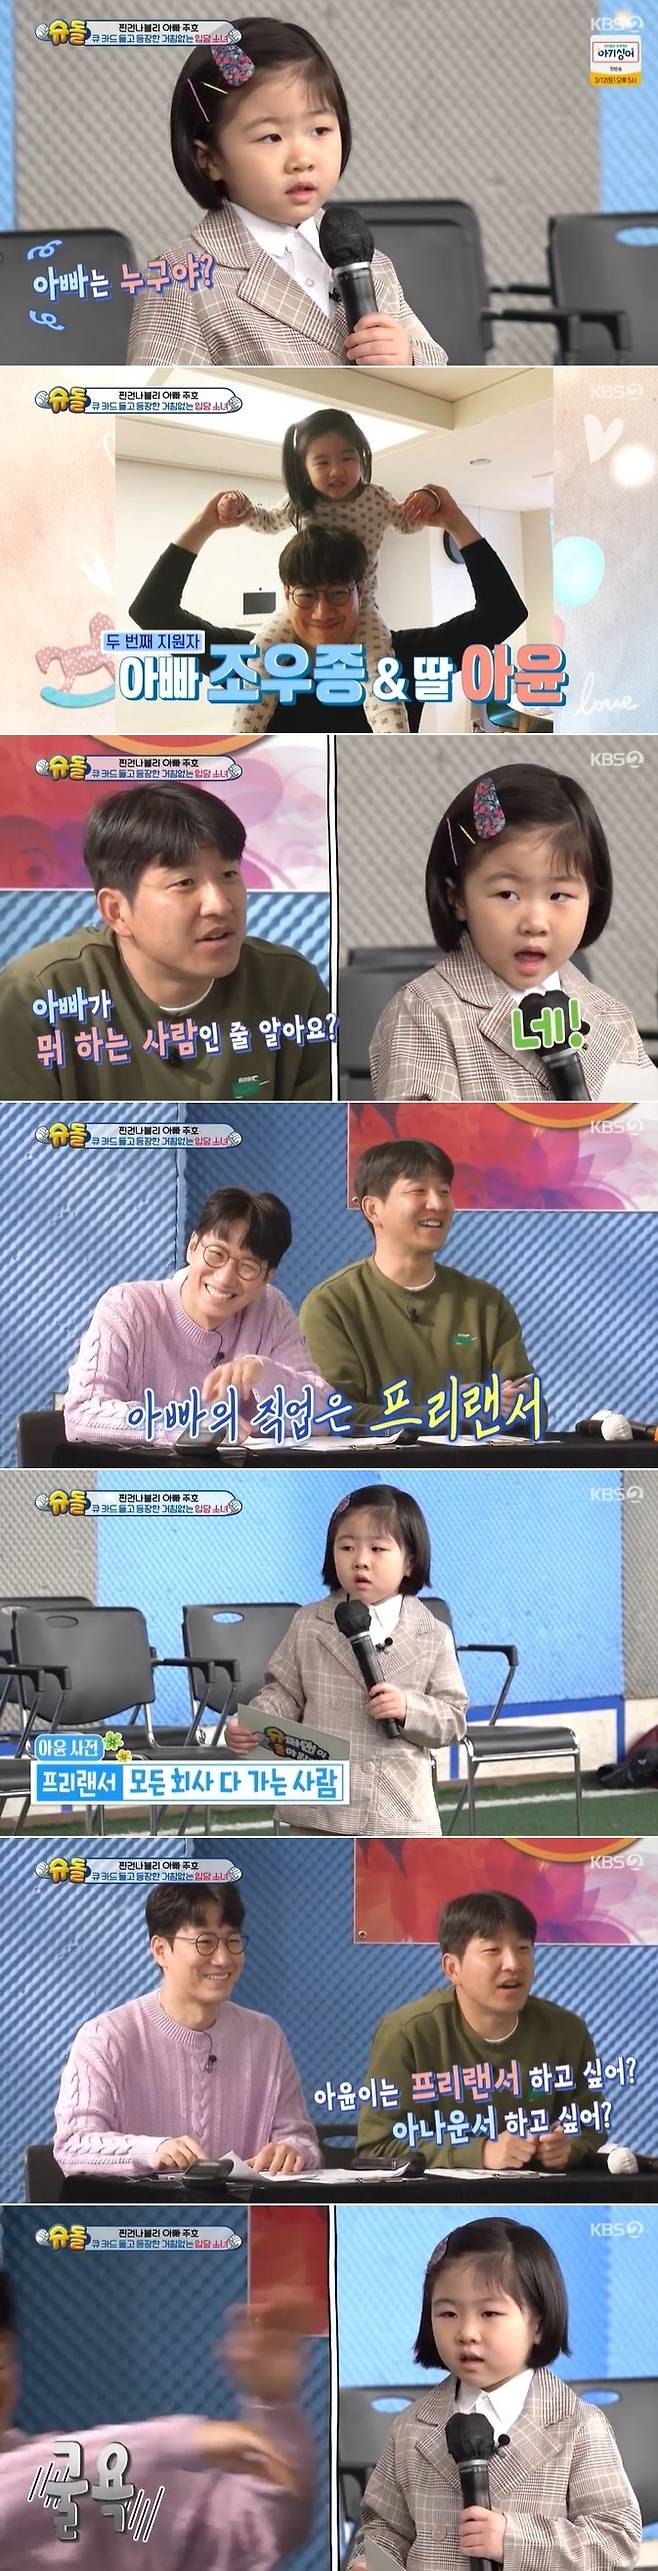 Ayun, a six-year-old daughter of the couple, Daeun Jeong, appeared in The Return of Superman.On February 27, KBS 2TV Superman Returns, Park Joo-ho founded Pachoo Little Football Team and recruited members.Cho Woo-jong has MC for the audition.On this day, the daughter of the couple, Daeun Jeong, appeared in a surprise. Joo Jong showed up as a clean MC when he saw Ayun walking in the toddler.Asked by Park Joo-ho, Do you know what your dad is? Ayun answered Freelancers and made everyone burst.Freelancers go to all companies, he said.On the other hand, when asked about the job of her mother, KBS, Announcer Daeun Jeong, she said, Announcer and Announcer goes to one company.